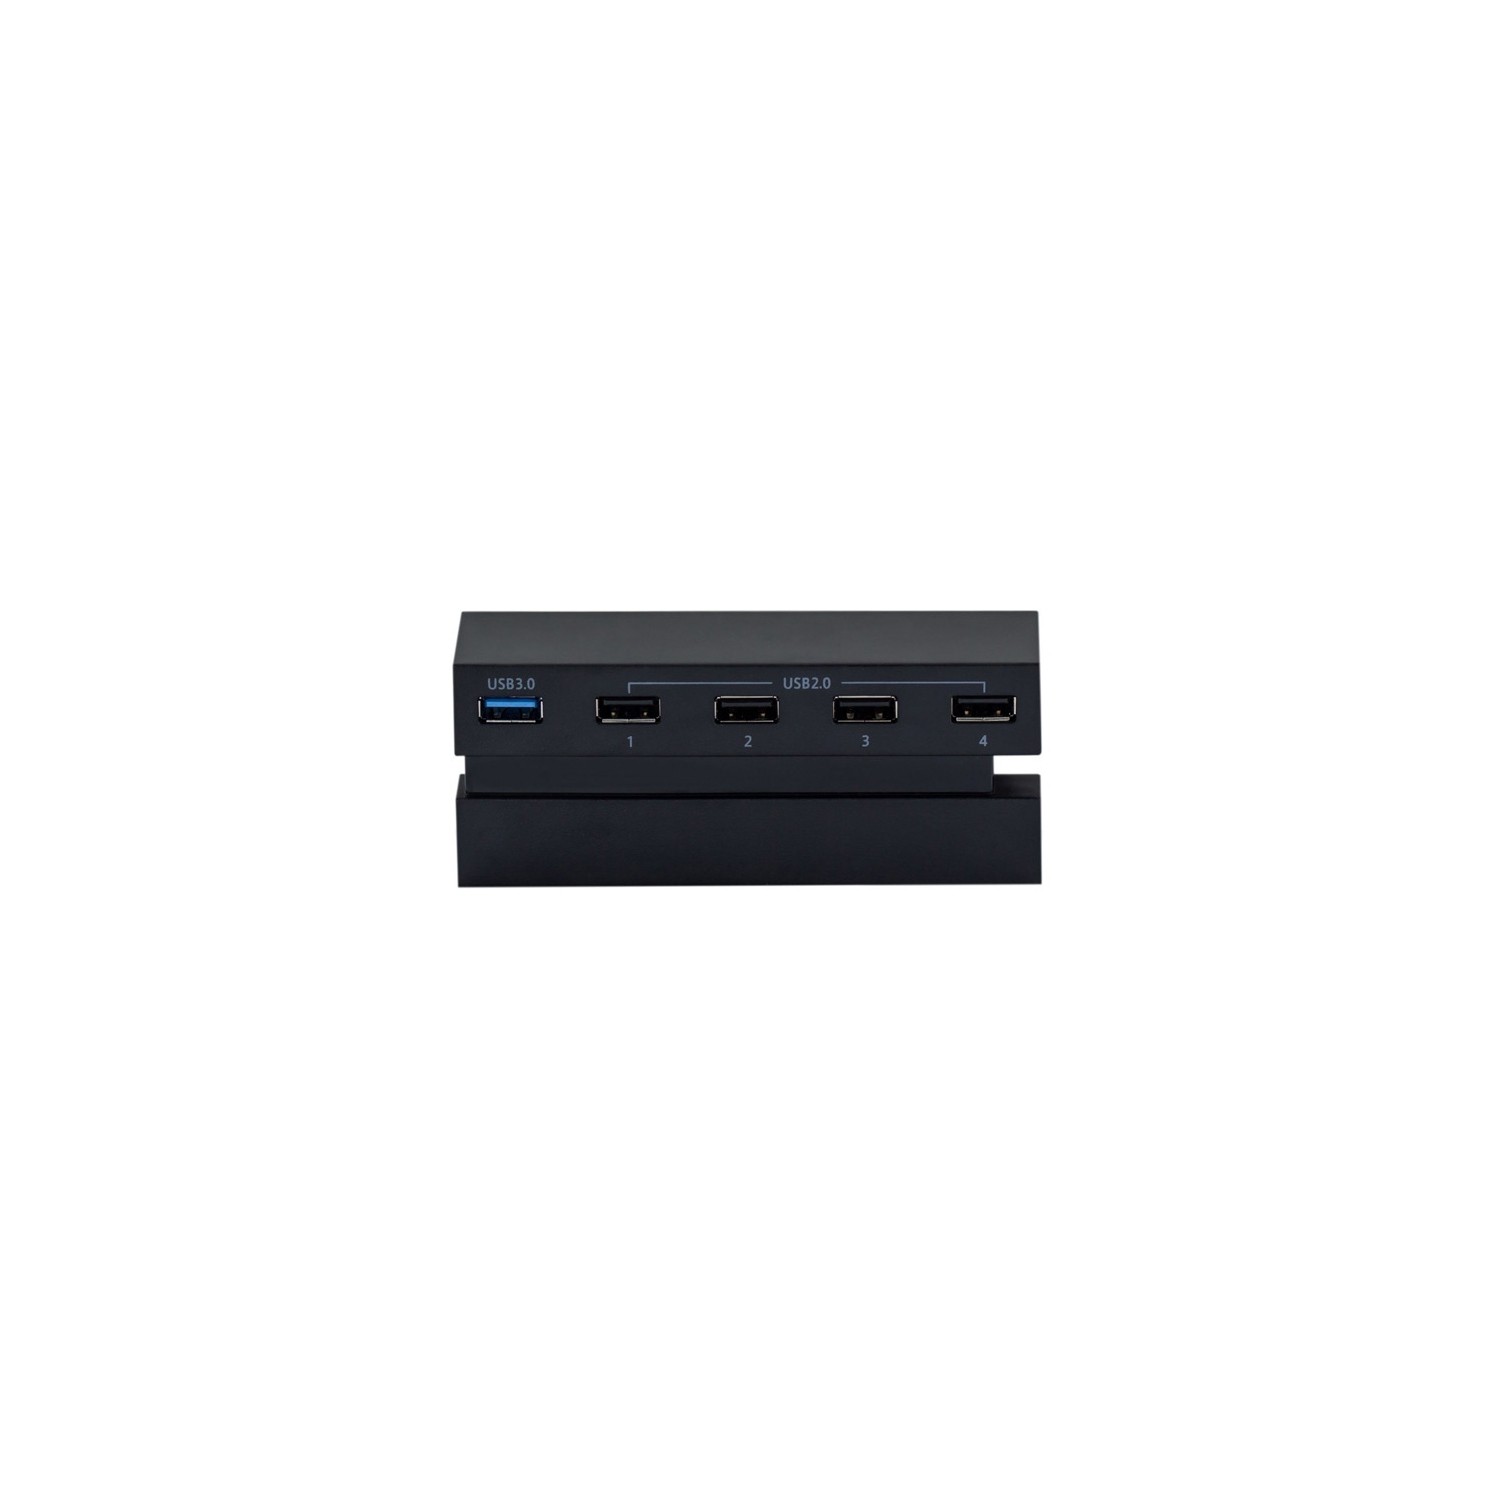 ICON USB 3.0 5-Slot Port for Playstation 4 (PS4)